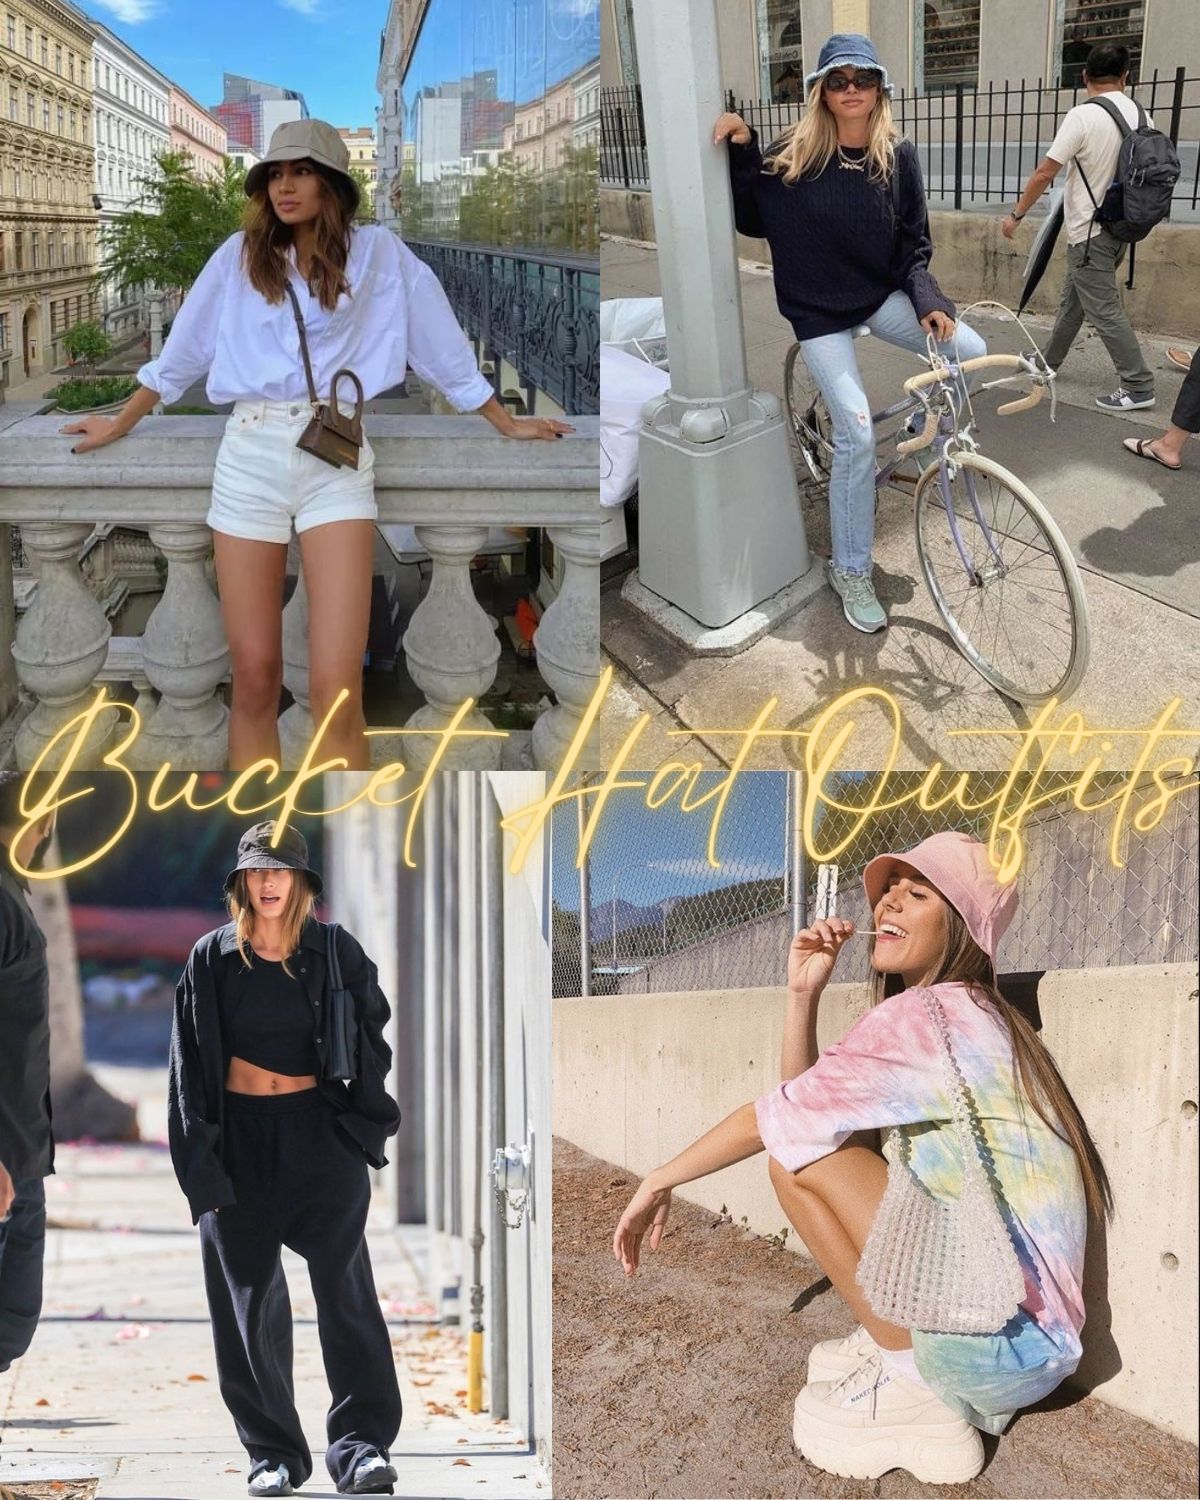 Four girls in casual cute outfits with bucket hats 